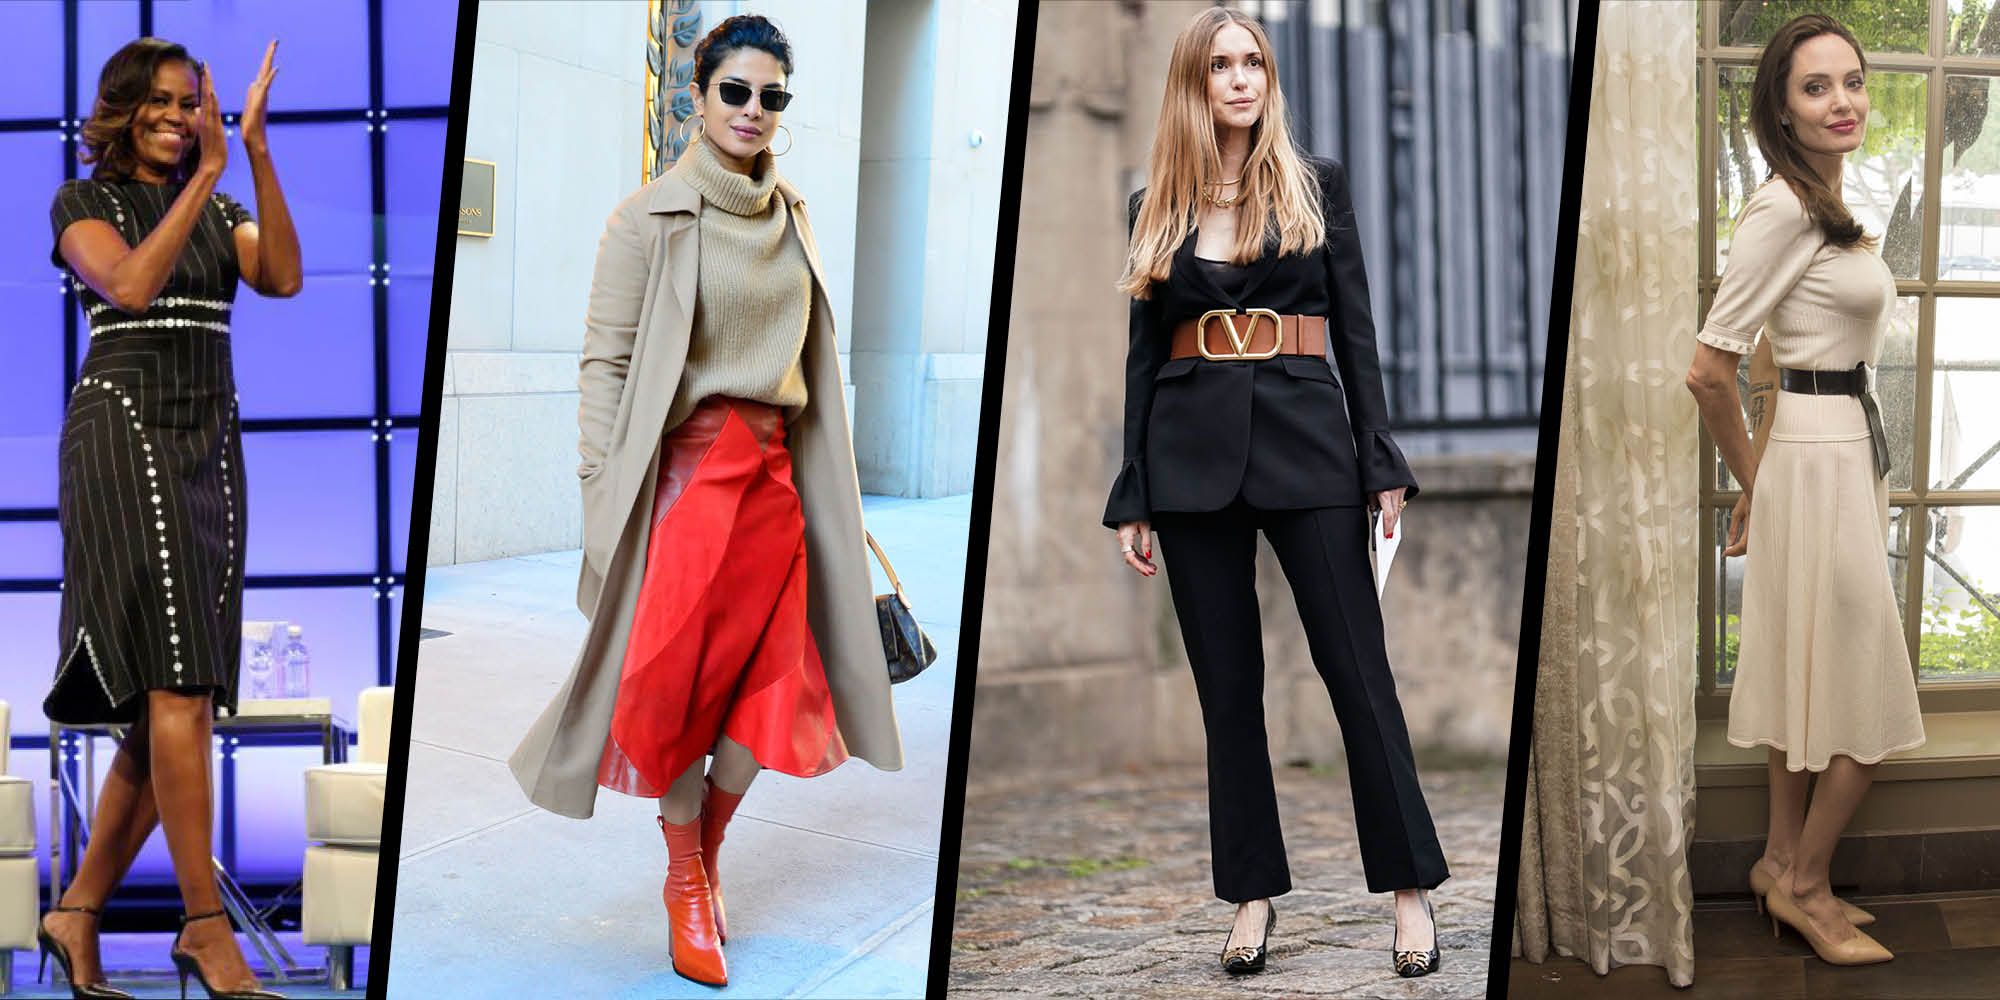 How To Make Your Boring Workwear Look More Fashionable